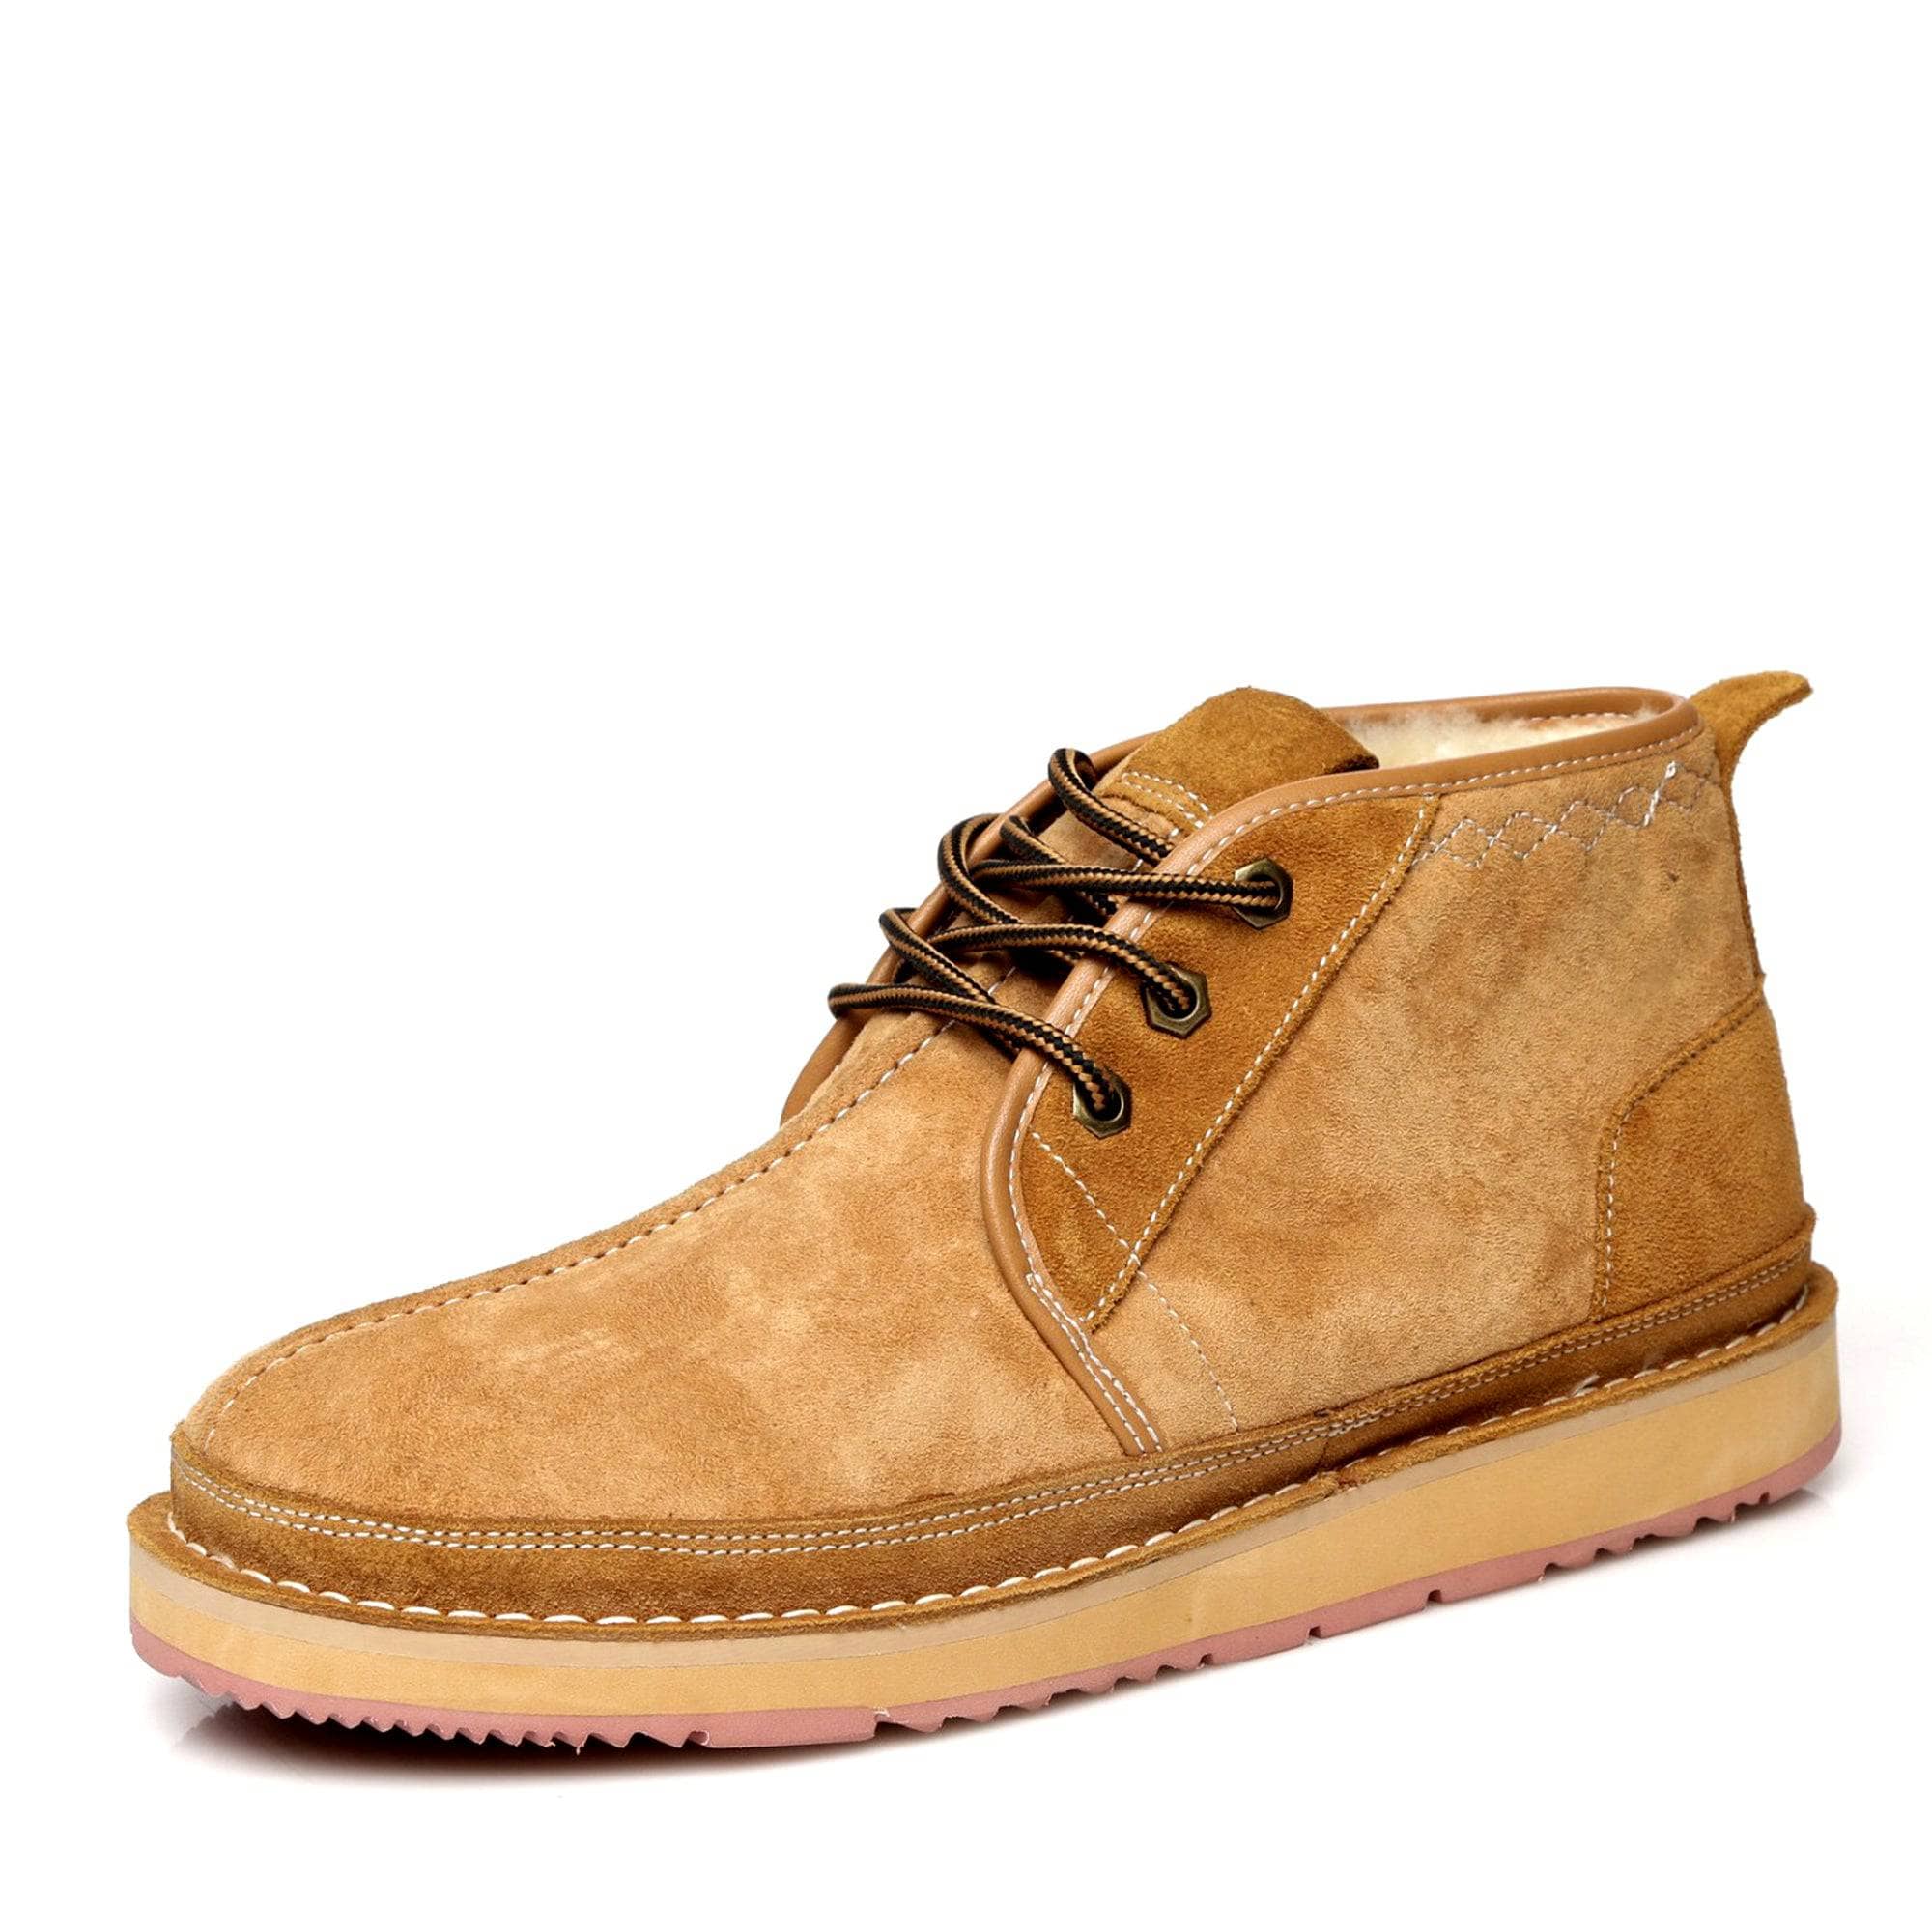  - UGG Casual Men’s Lace-up Ankle Boots - Original UGG Australia Classic